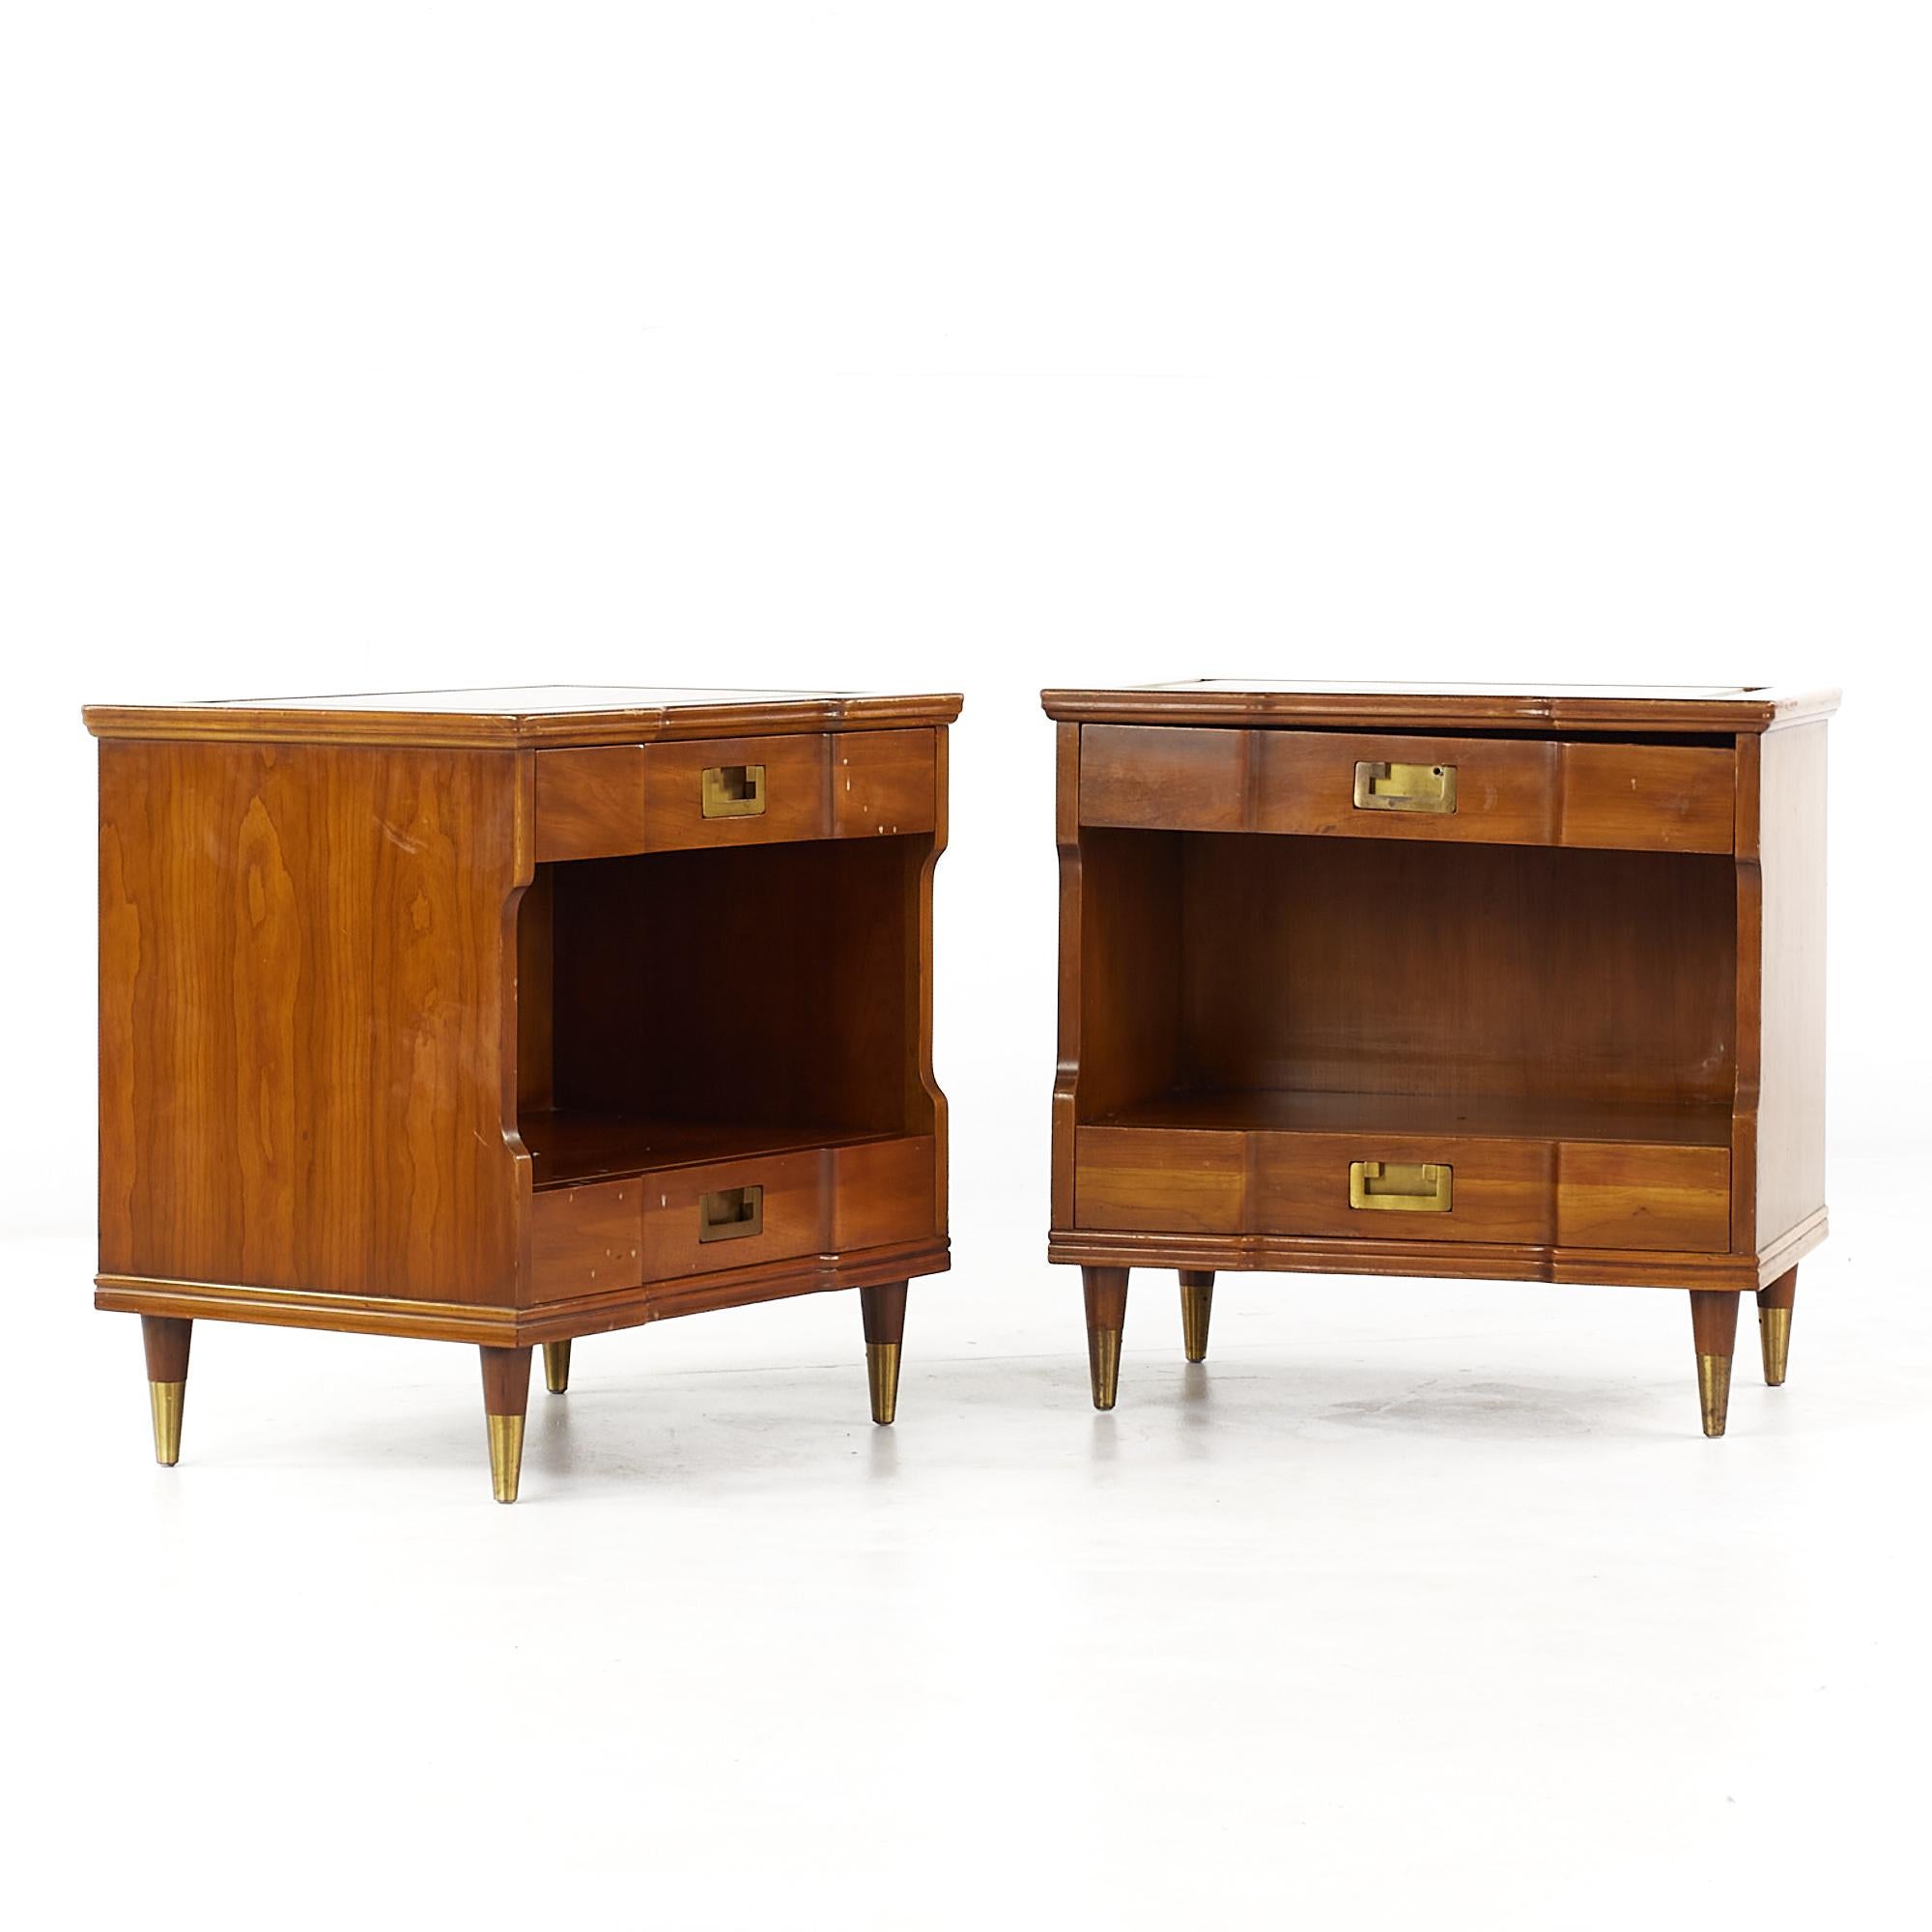 John Widdicomb Mid Century walnut and brass nightstands - pair

Each nightstand measures: 25 wide x 18 deep x 24.5 inches high

All pieces of furniture can be had in what we call restored vintage condition. That means the piece is restored upon